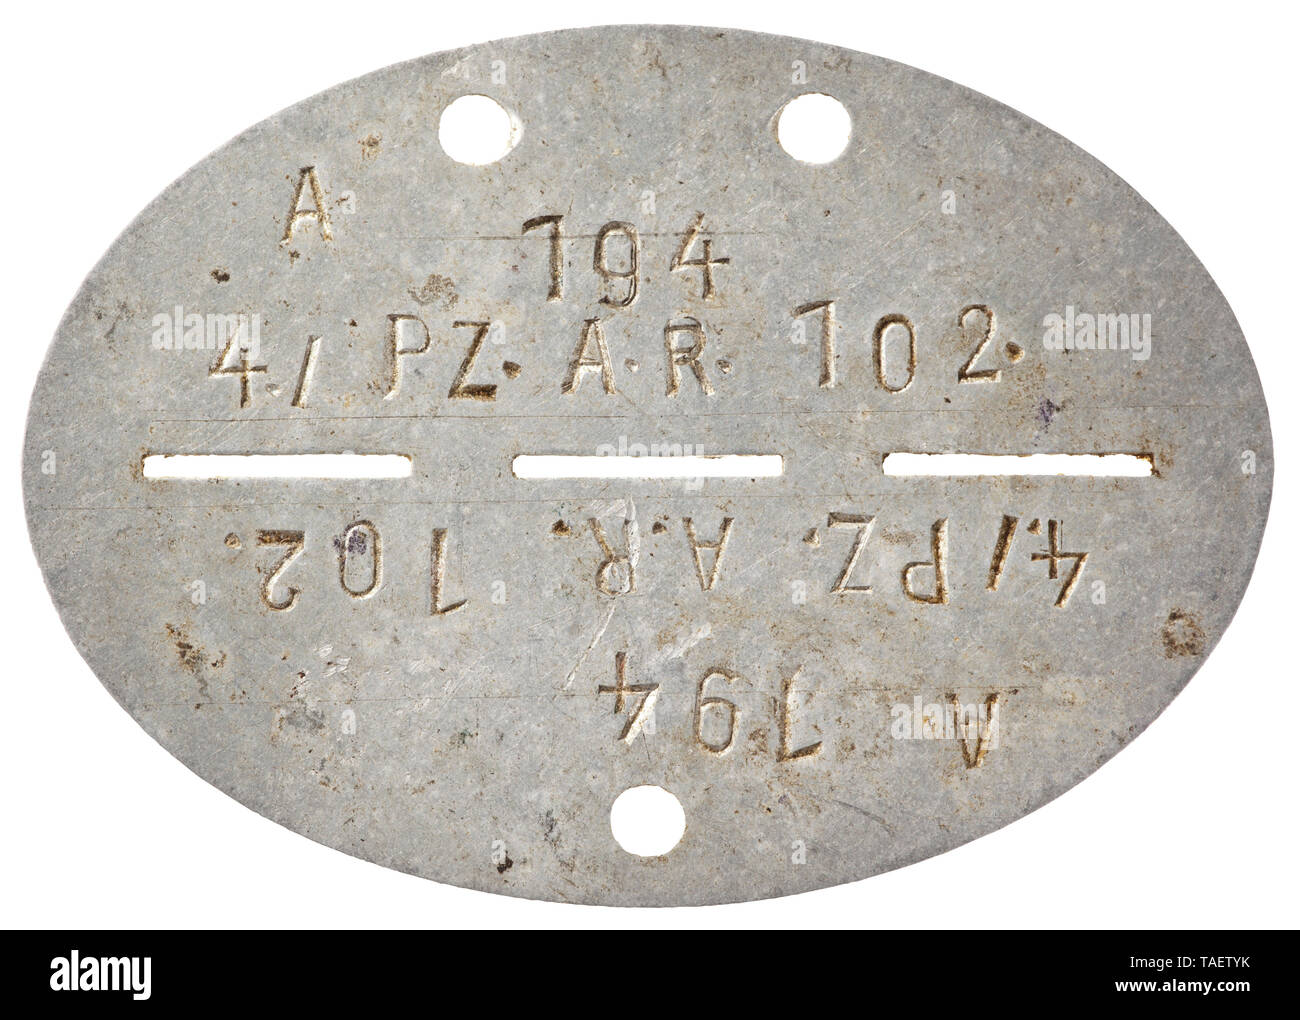 An identification tag Panzer Artillery Regiment 102 Aluminium mit vs. Bezeichnung 'A 194 - 4./Pz. A.R. 102', rs. mit Markung '2. Schrift'. historic, historical, 20th century, Editorial-Use-Only Stock Photo